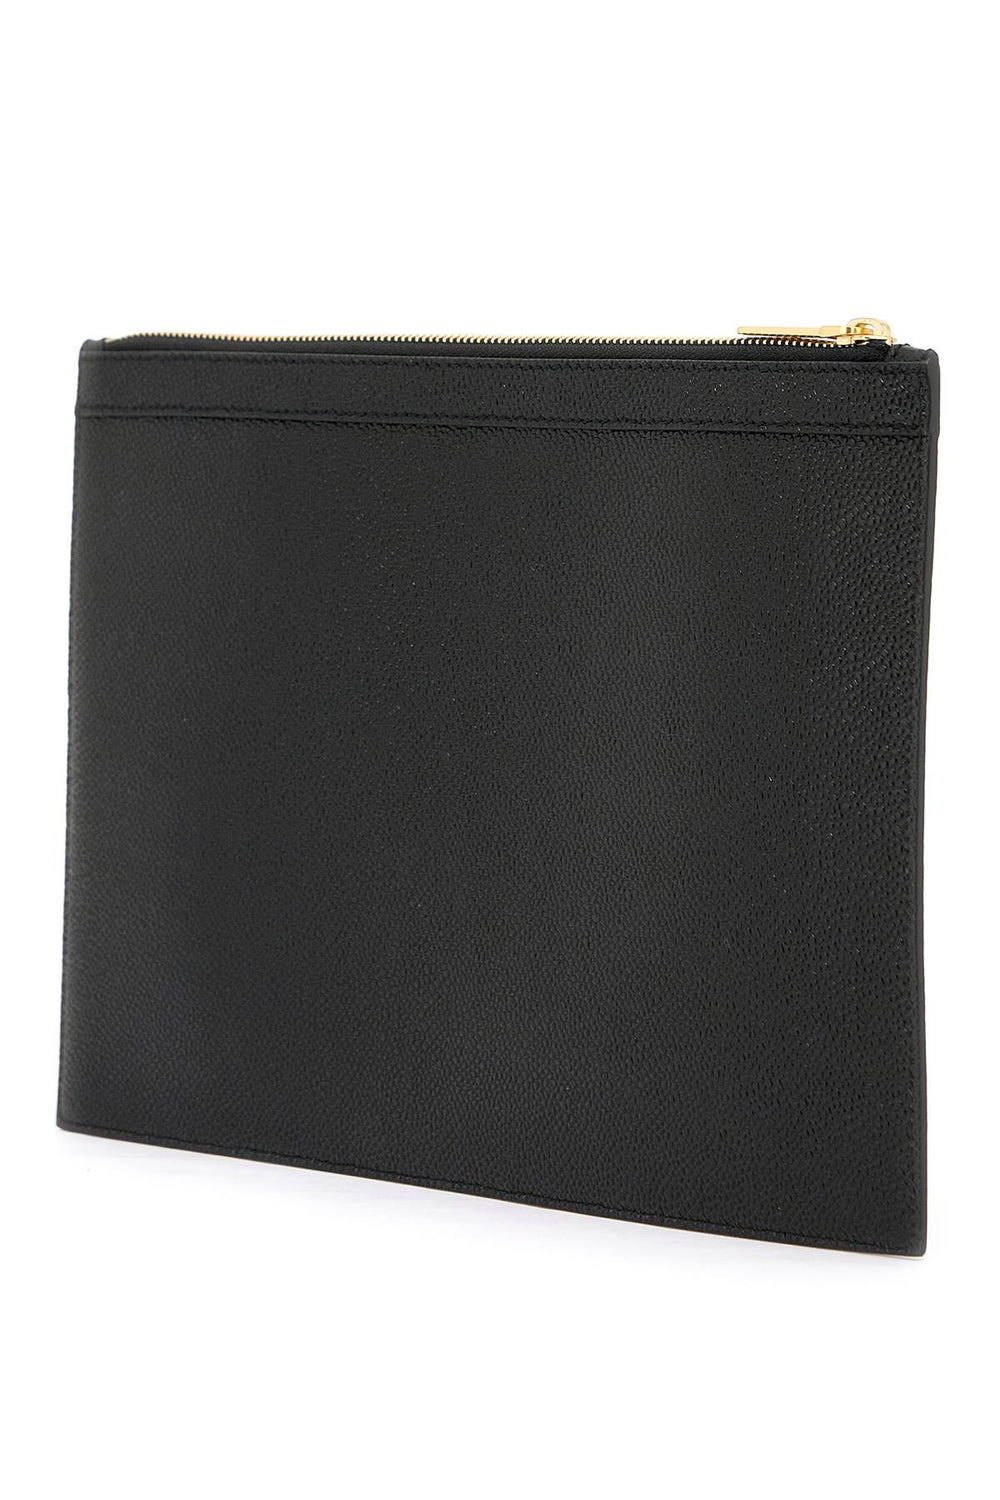 leather small document holder-1